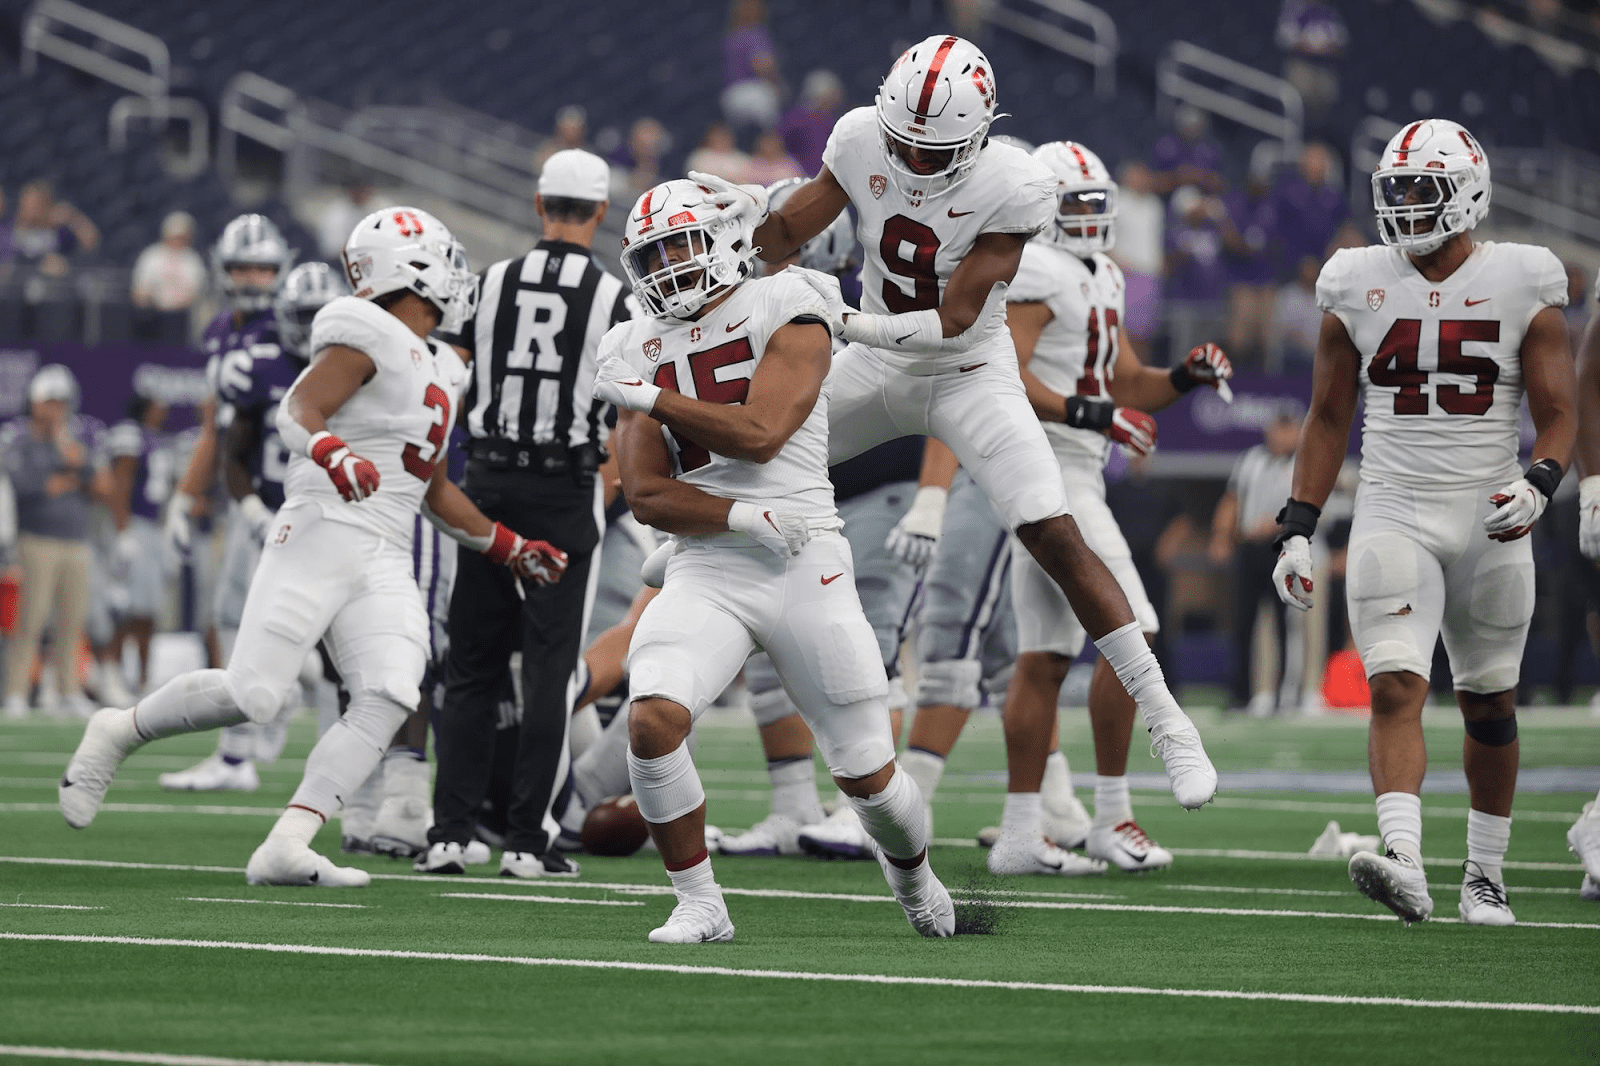 Stephen Herron will be playing for Louisville this fall after transferring from Stanford. Hula Bowl scout Ian McNice breaks down Herron as an NFL Prospect in his report.